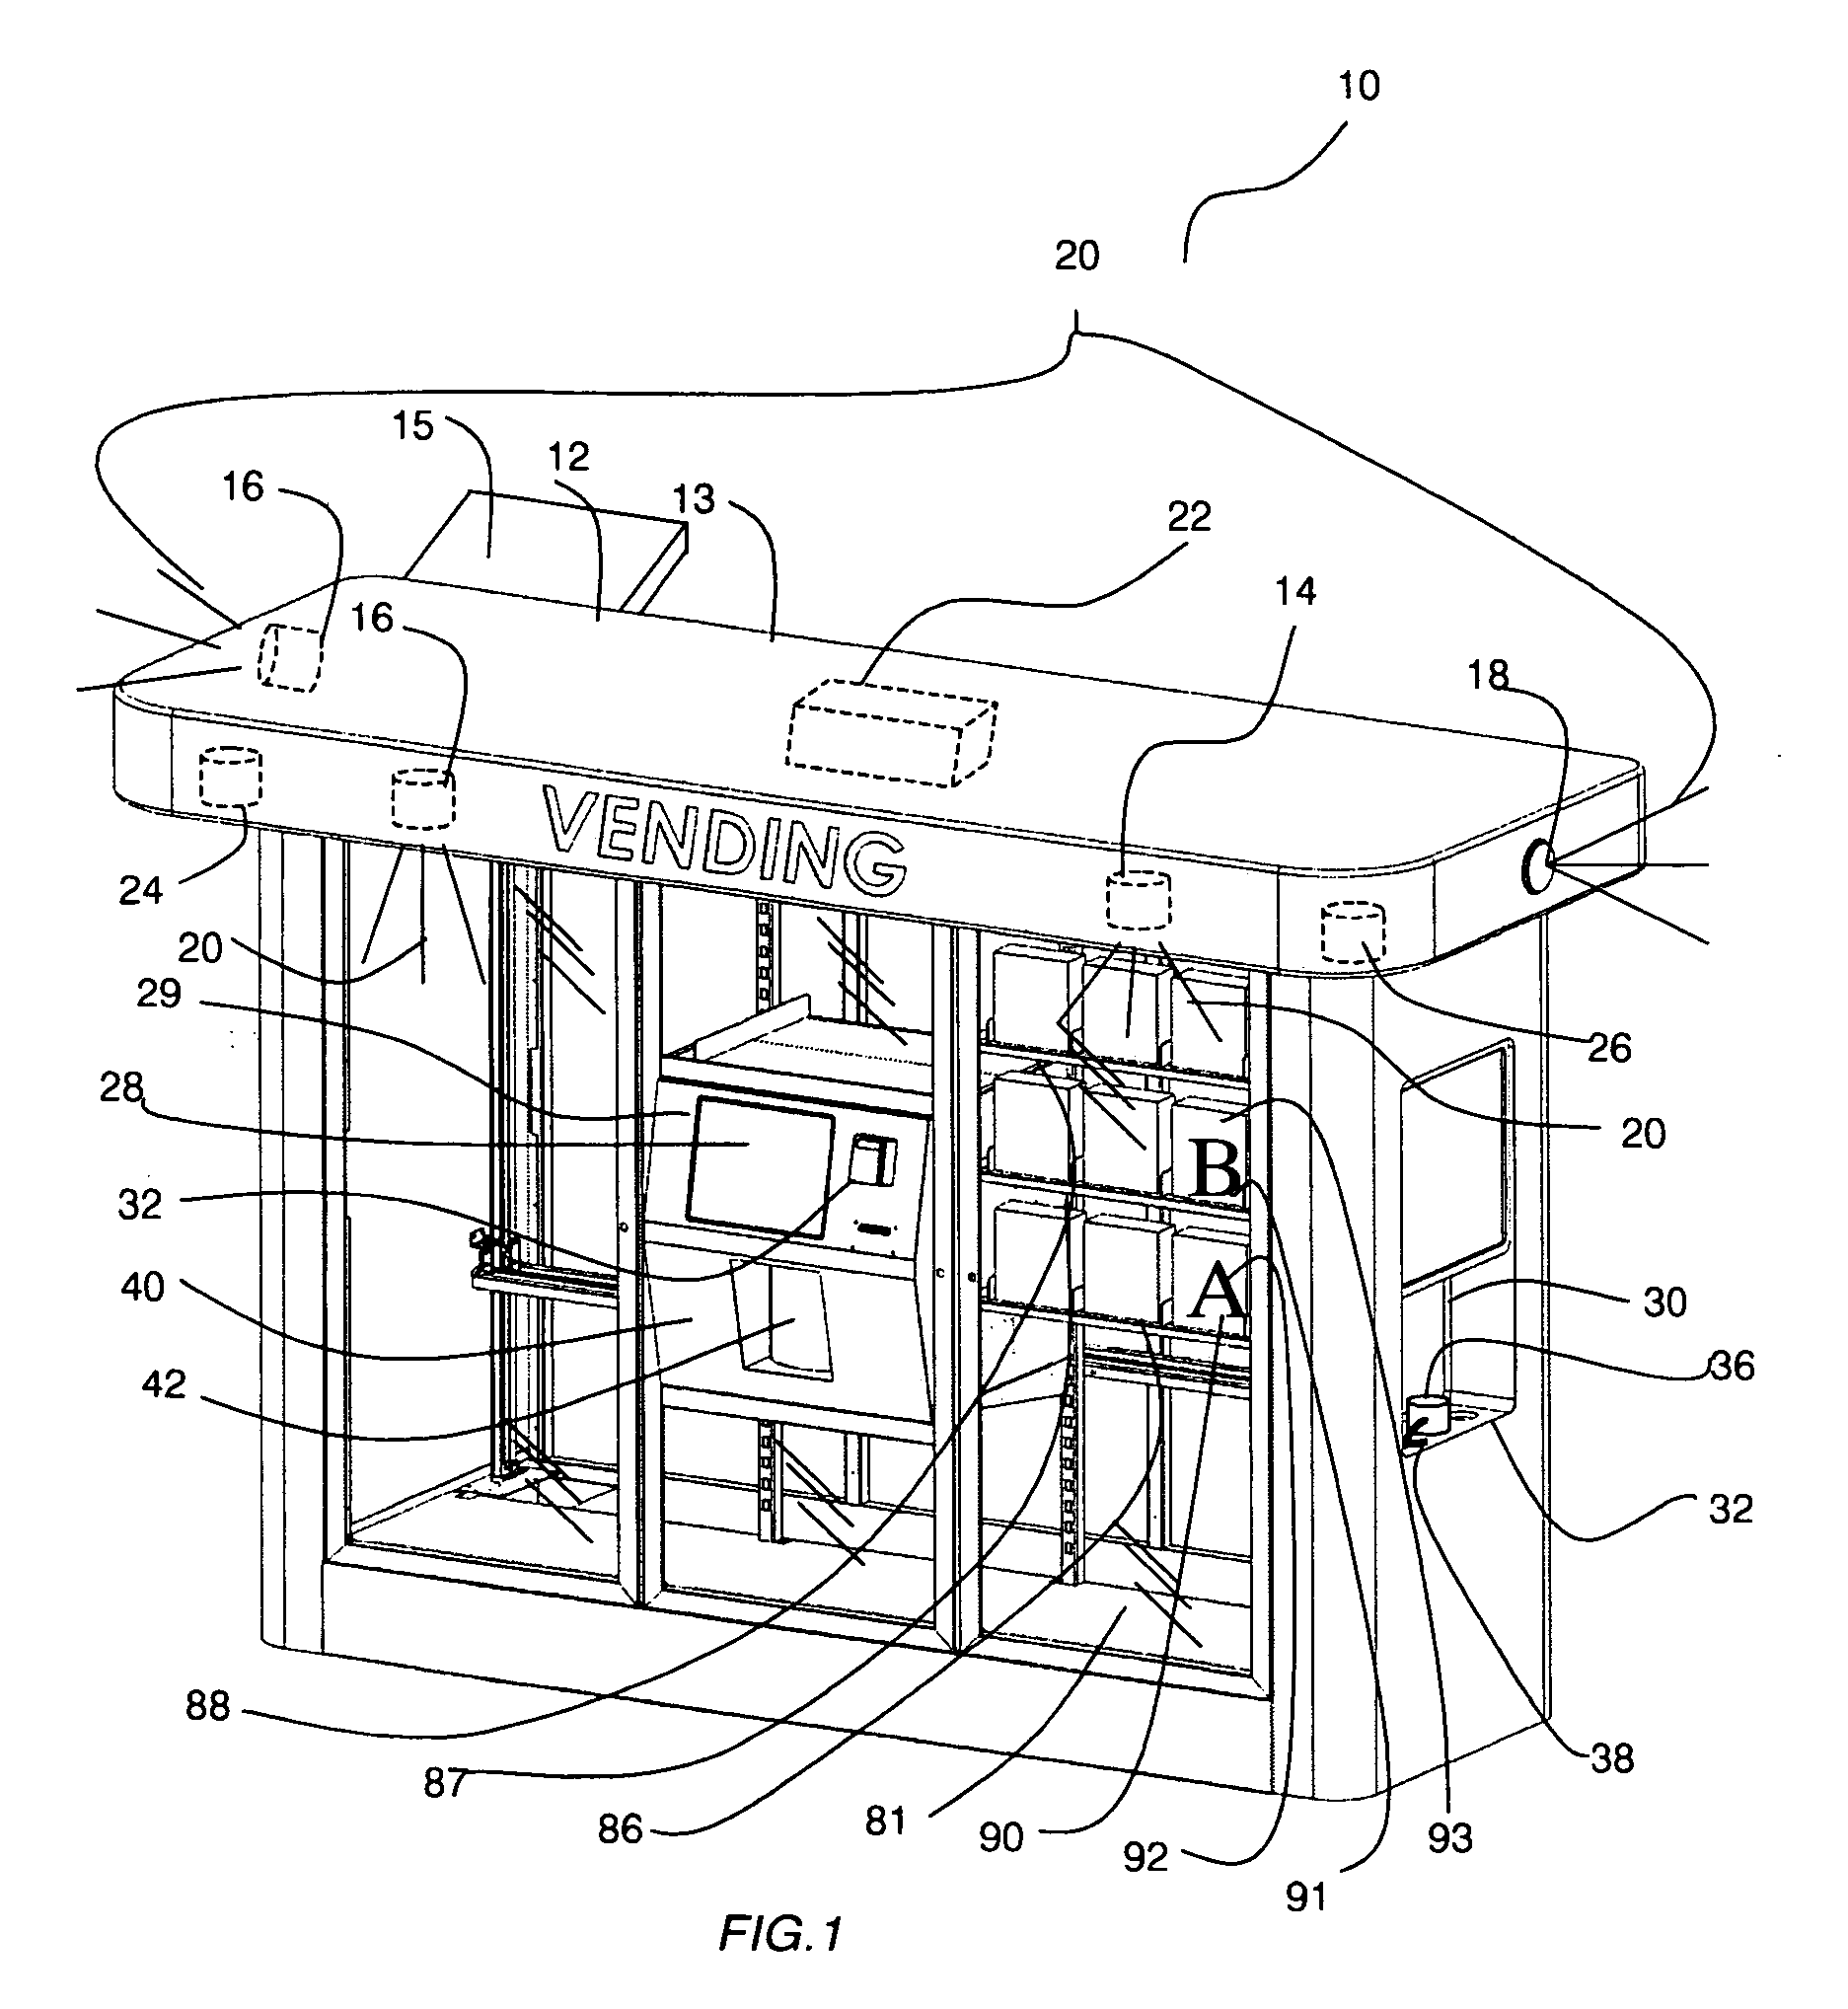 Article storage and retrieval apparatus and vending machine